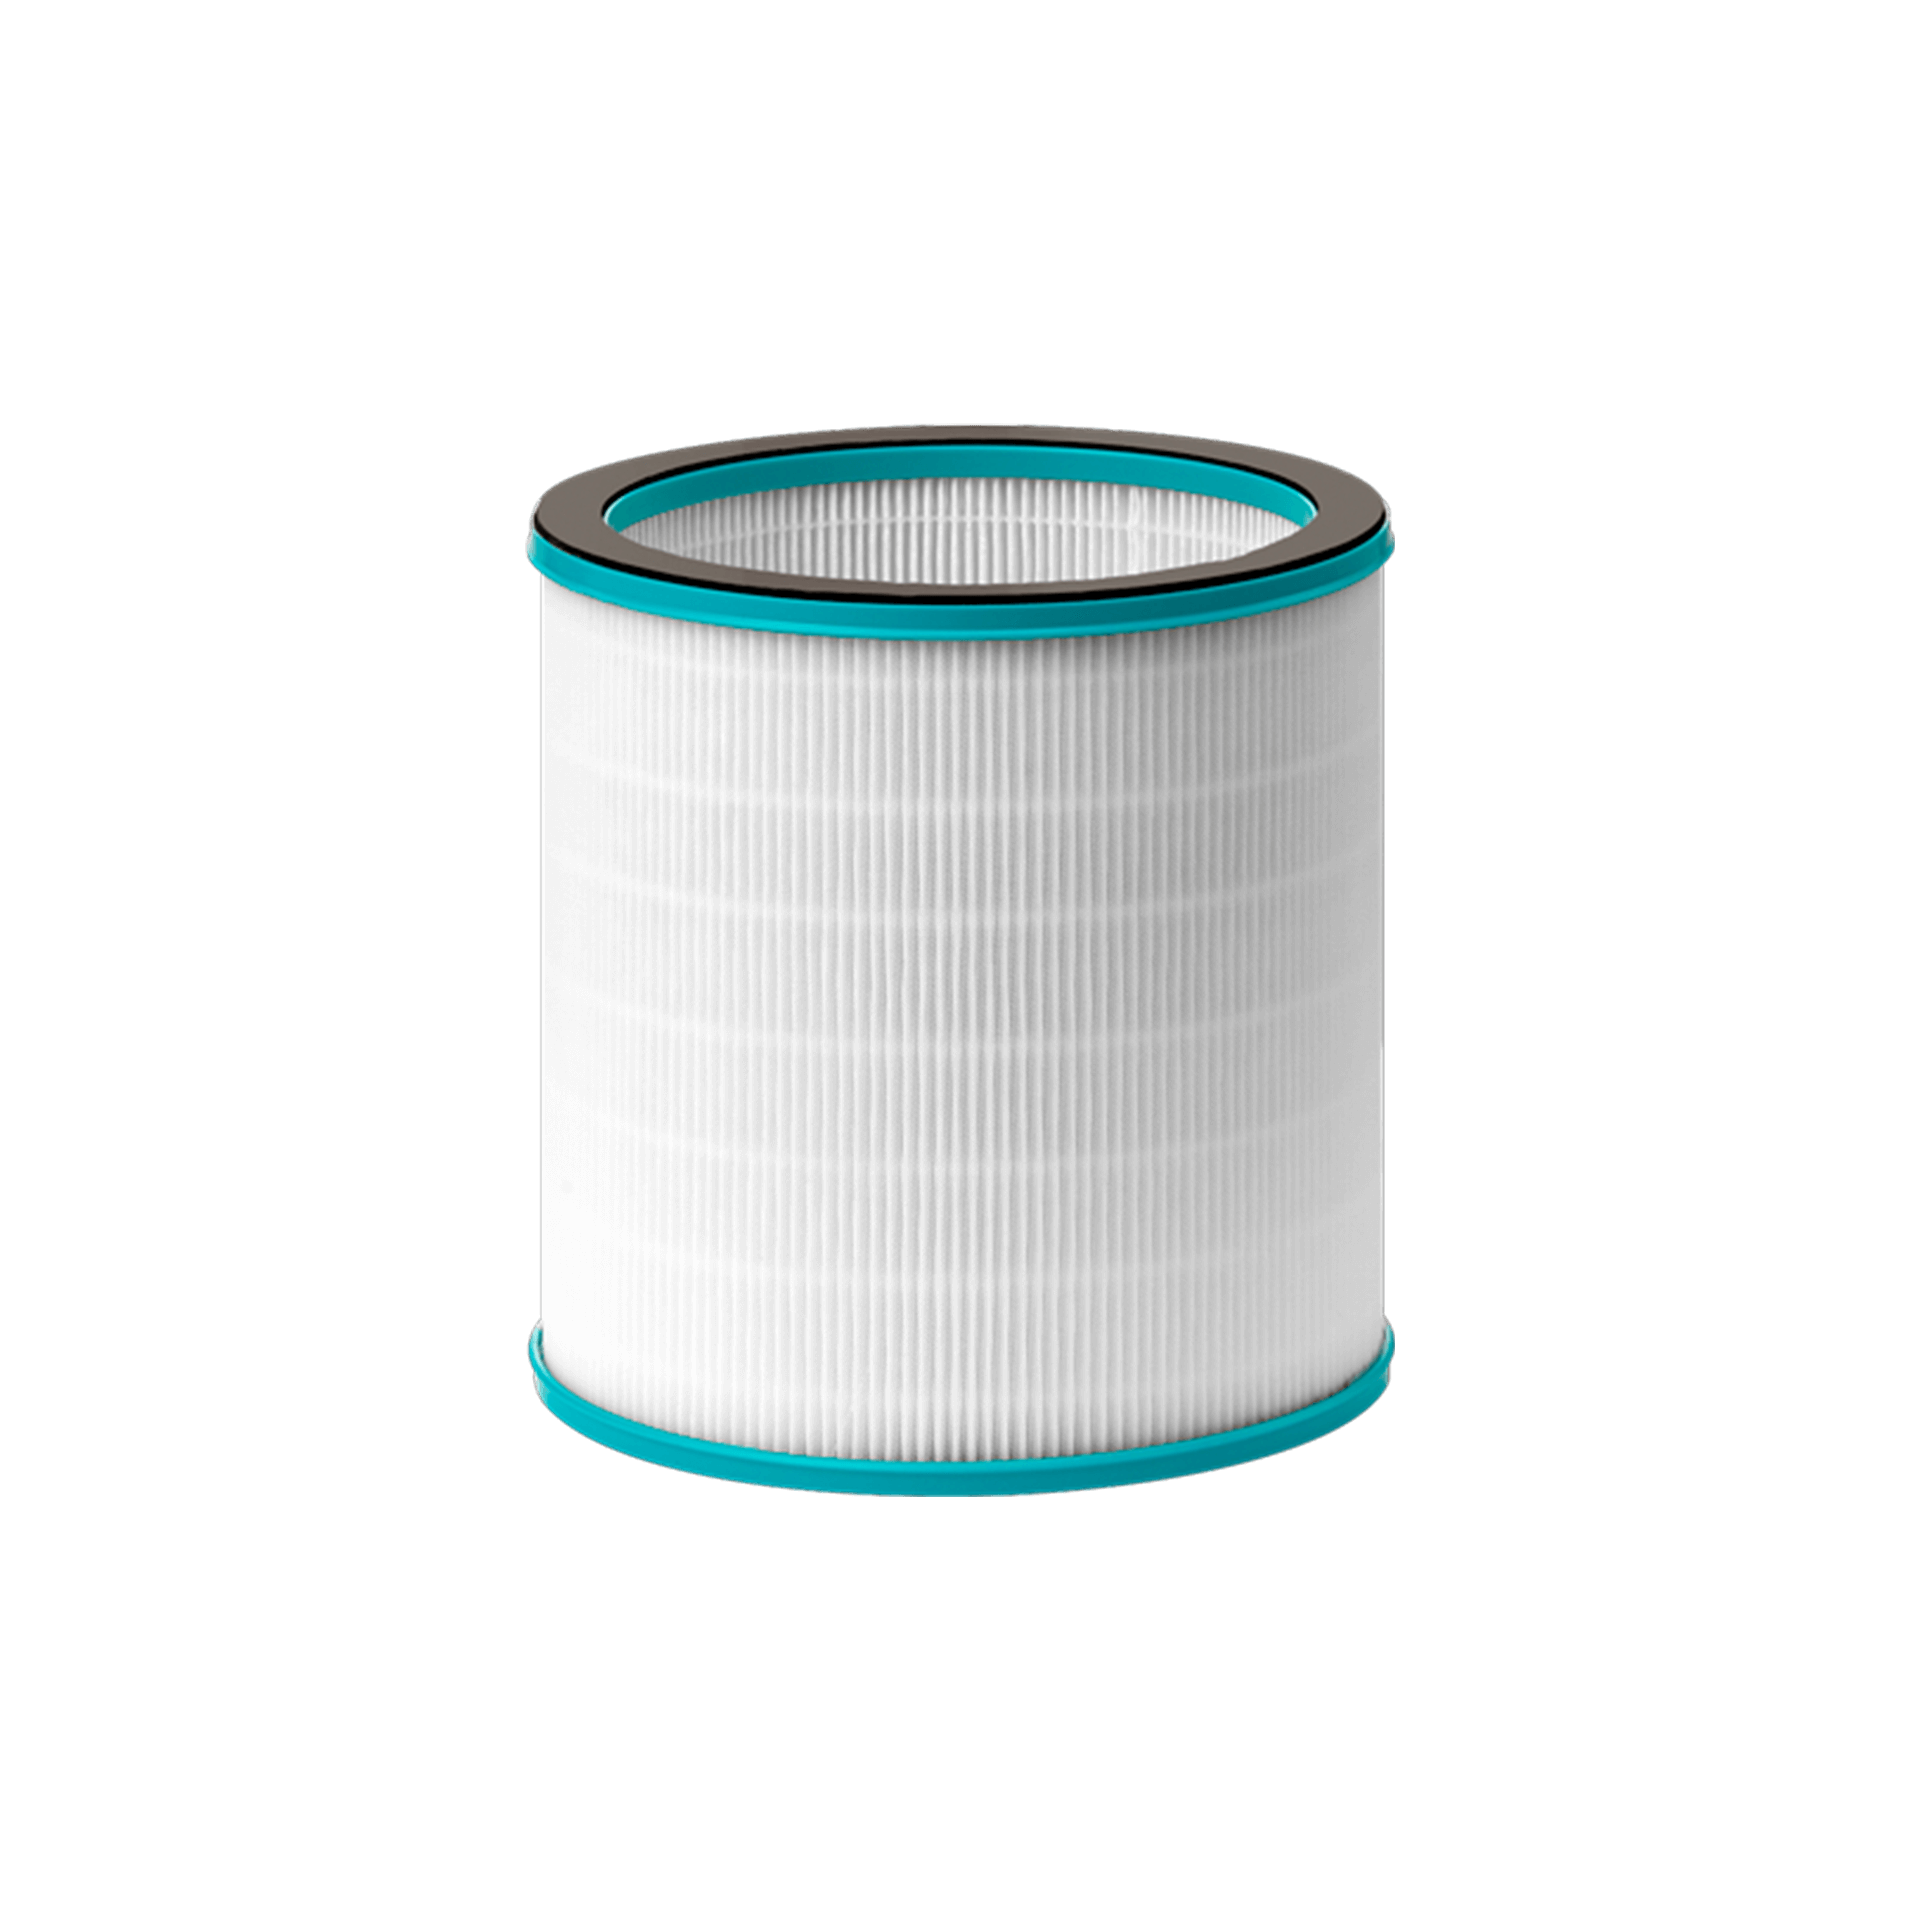 H13 Filter for AP100 Hybrid 3-in-1 Air Purifier with heating and cooling function